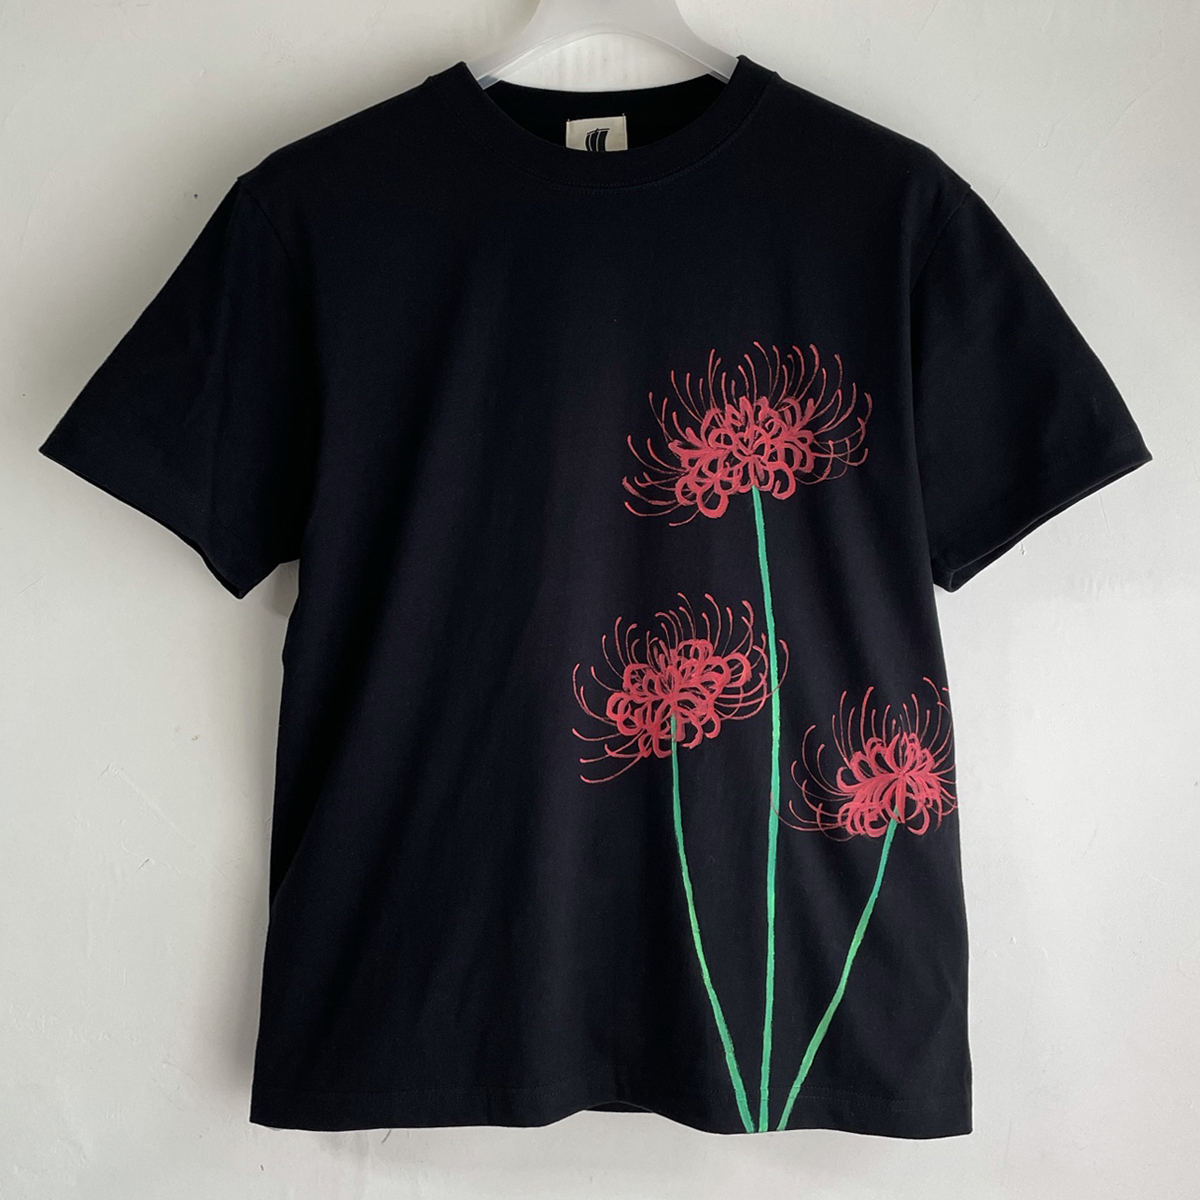 Men's T-shirt, XXL size, red spider lily pattern T-shirt, black, handmade, hand-drawn T-shirt, Japanese pattern, floral pattern, autumn/winter, XL size and above, Crew neck, Patterned